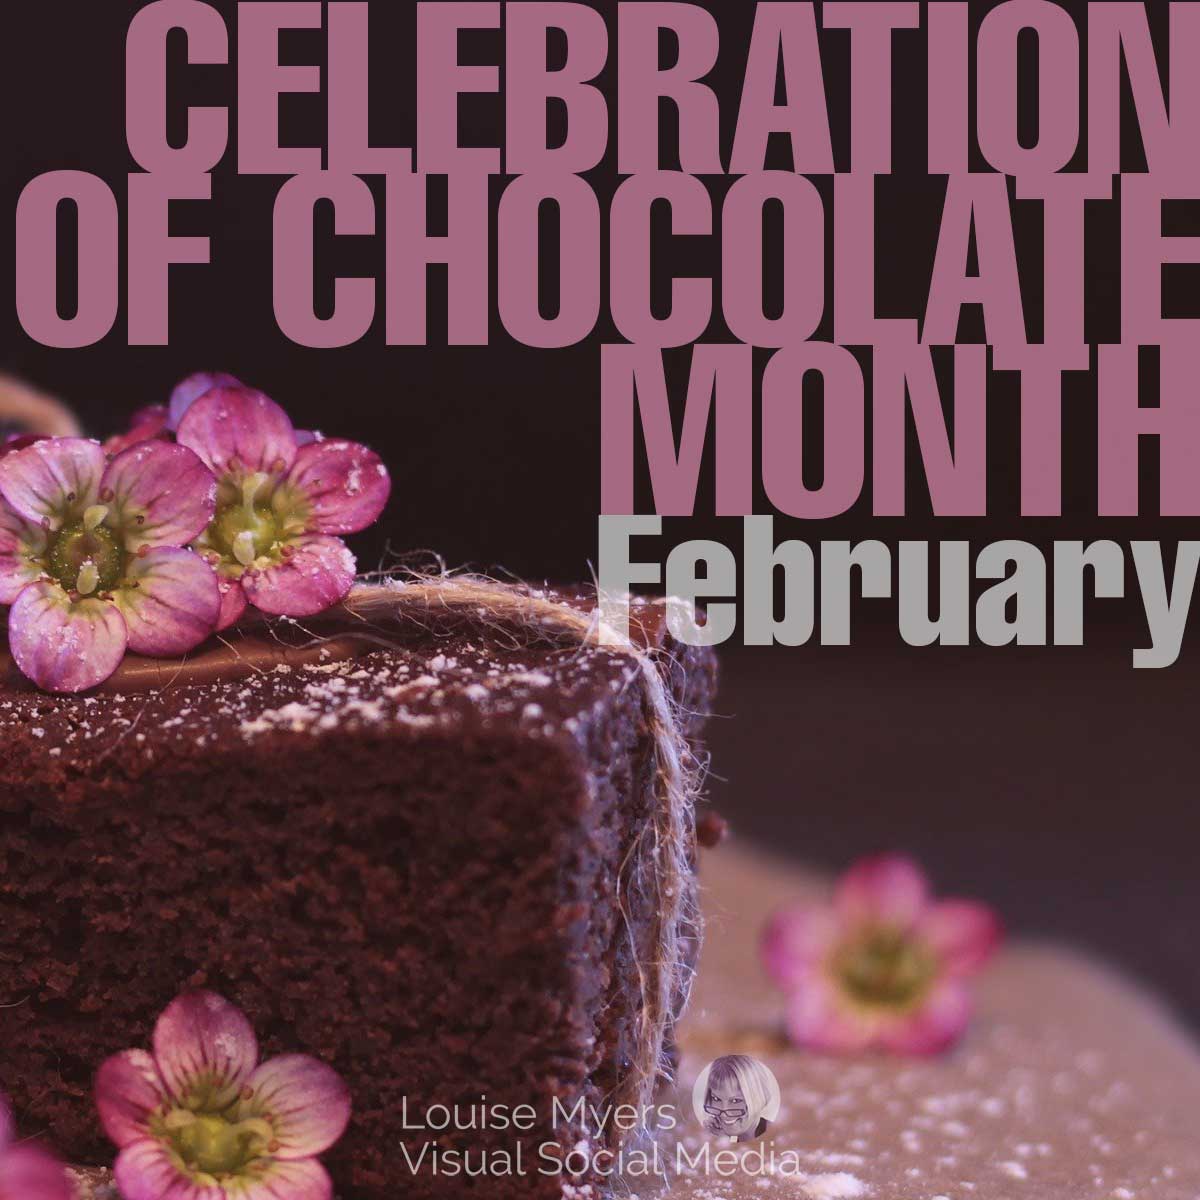 photo of chocolate cake with pink flowers says february is celebration of chocolate month.